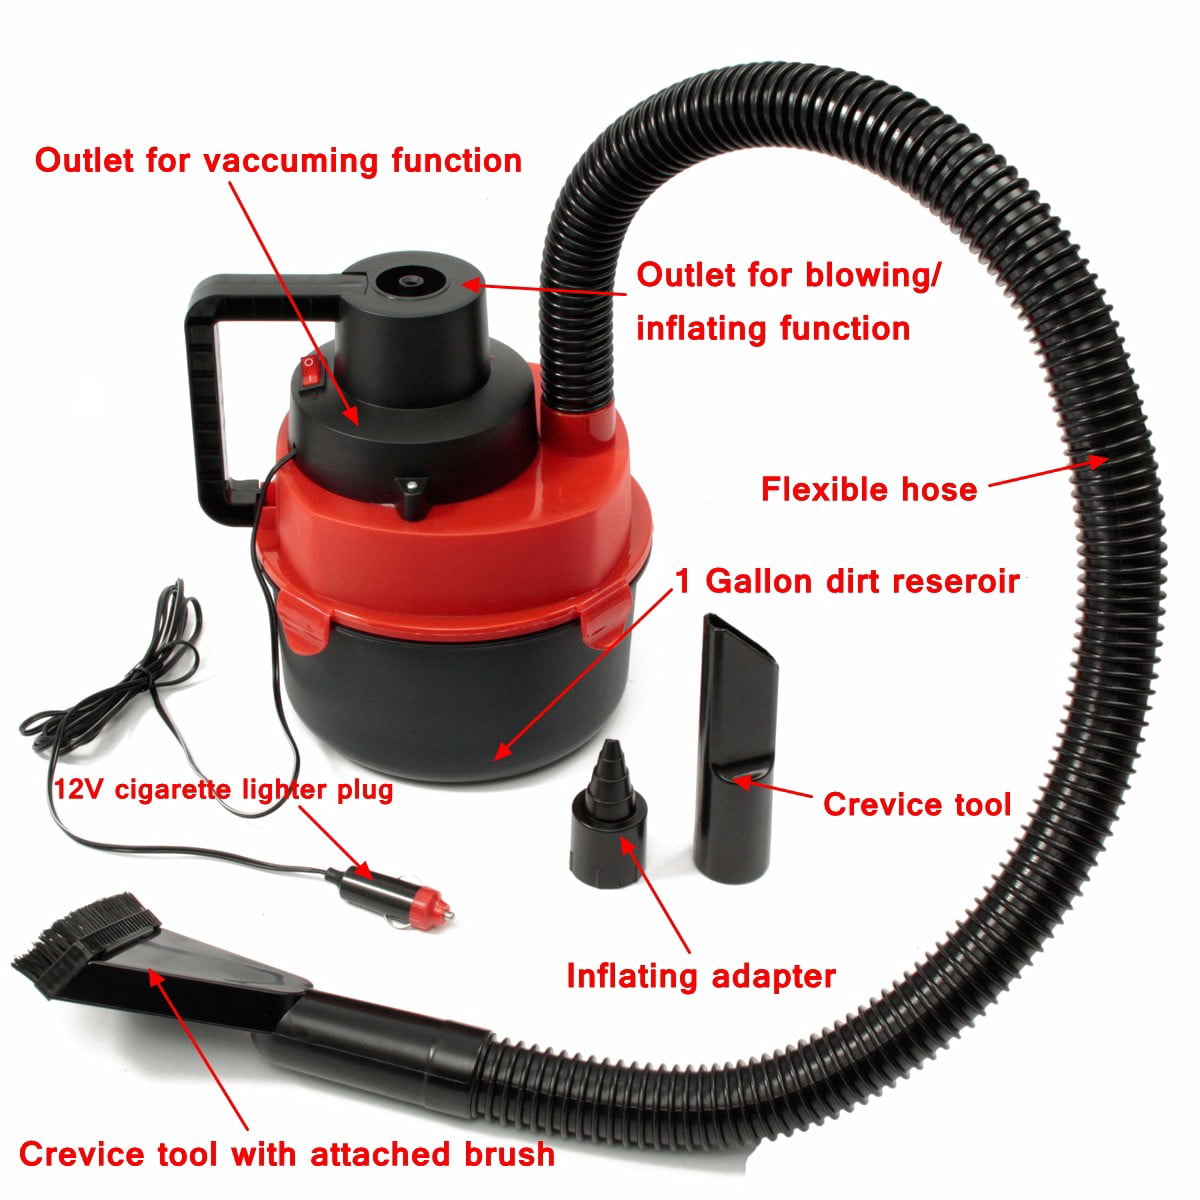 HCMAX 4 in 1 Car Vacuum Cleaner Portable Handheld Multi-Use Dust Buster Wet/Dry 12V 100W with Pressure Gauge LED Light Car Air Compressor Tire Inflator 150 PSI 